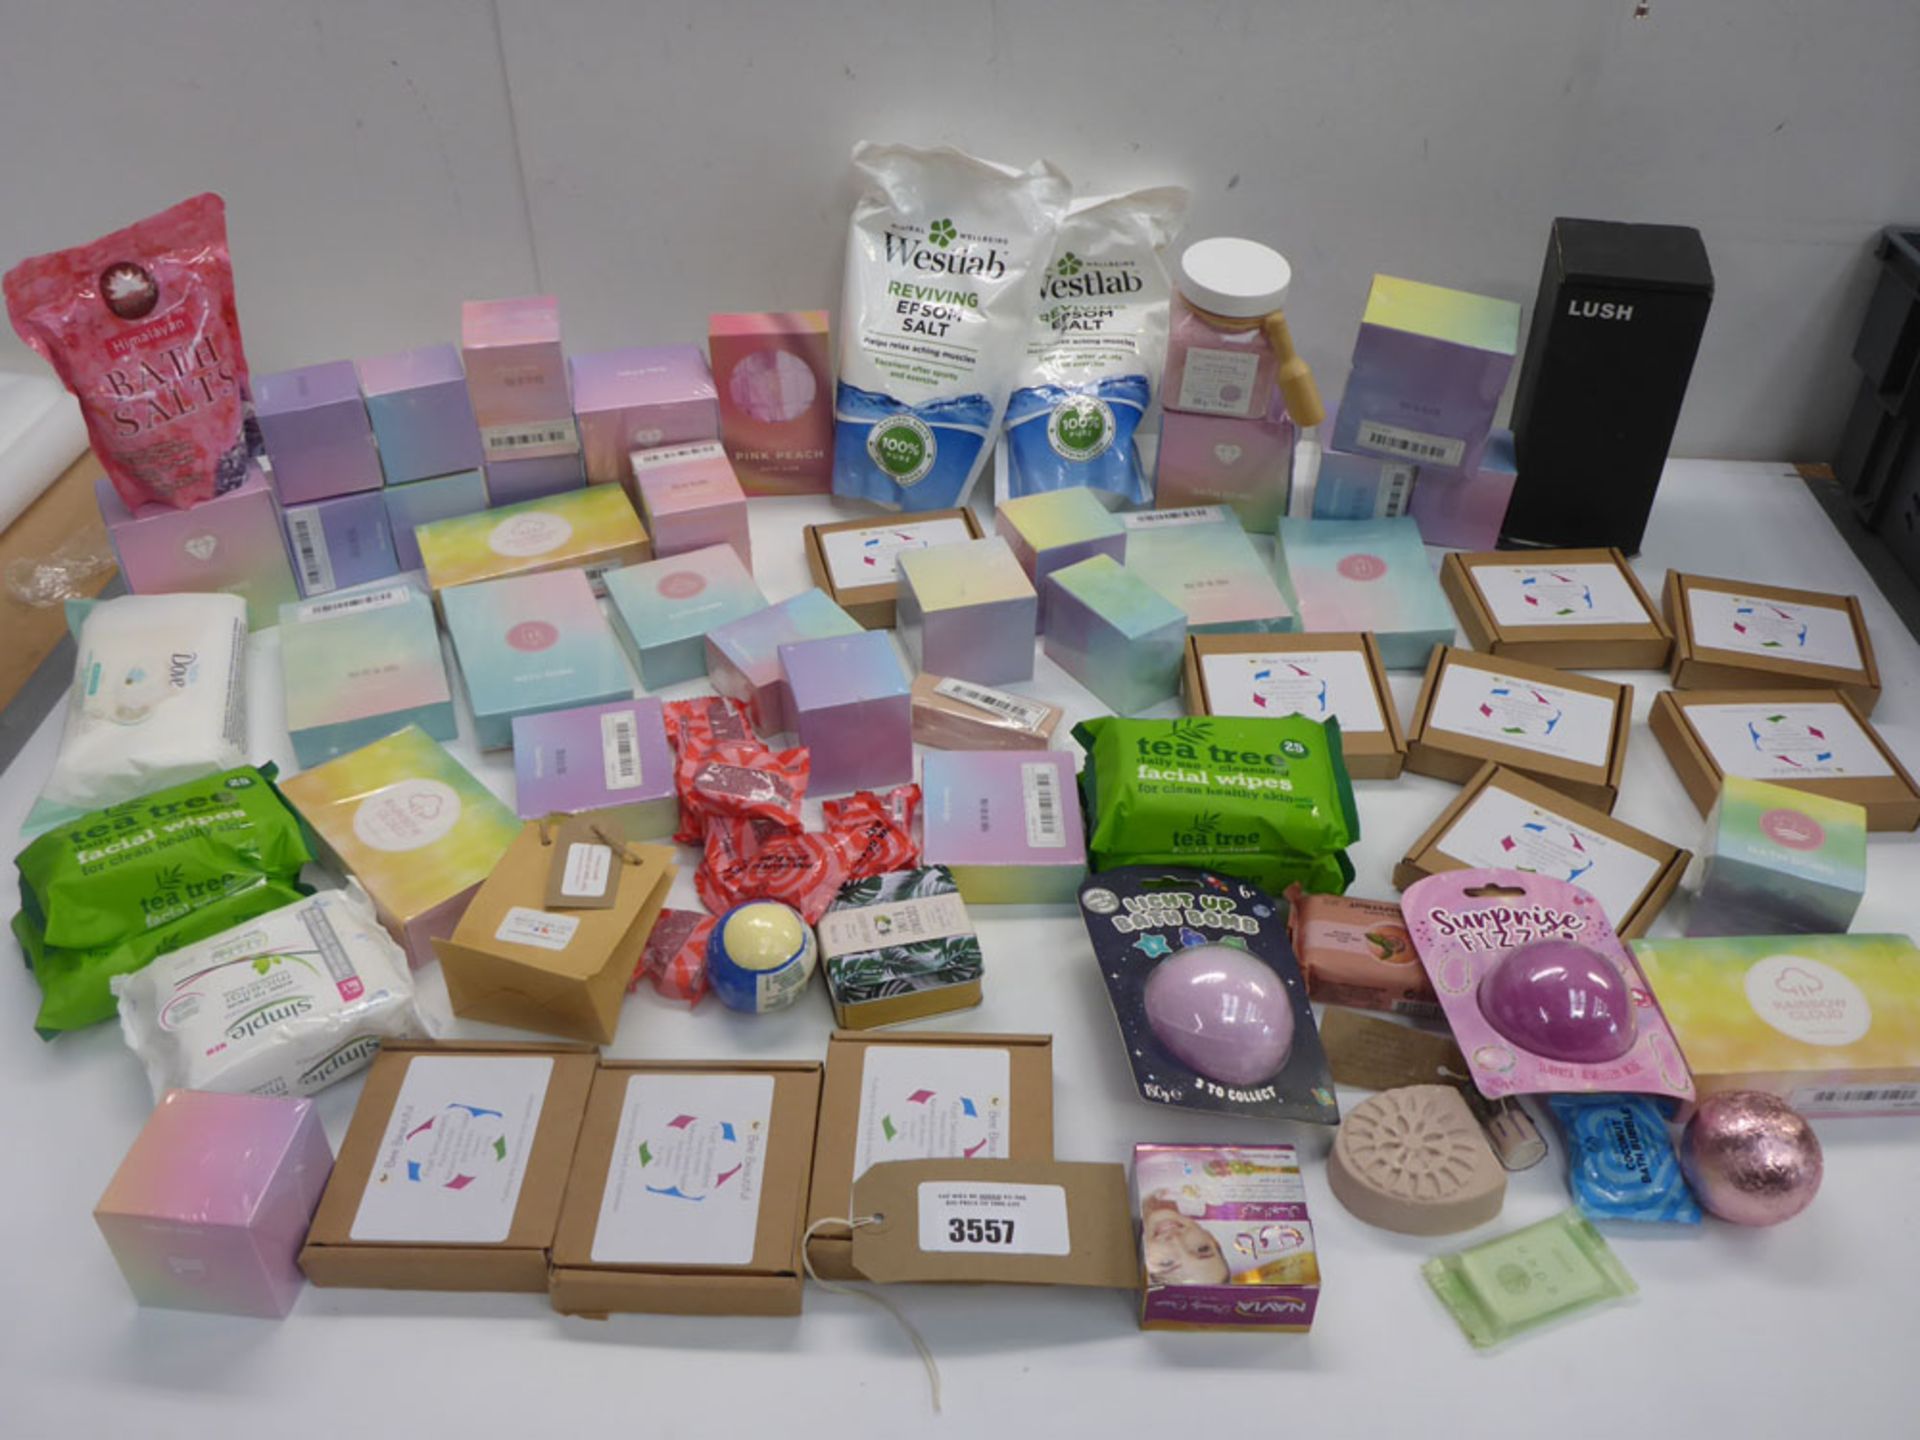 Large quantity of bath bombs, bars of soap, wet wipes and Epsom salts